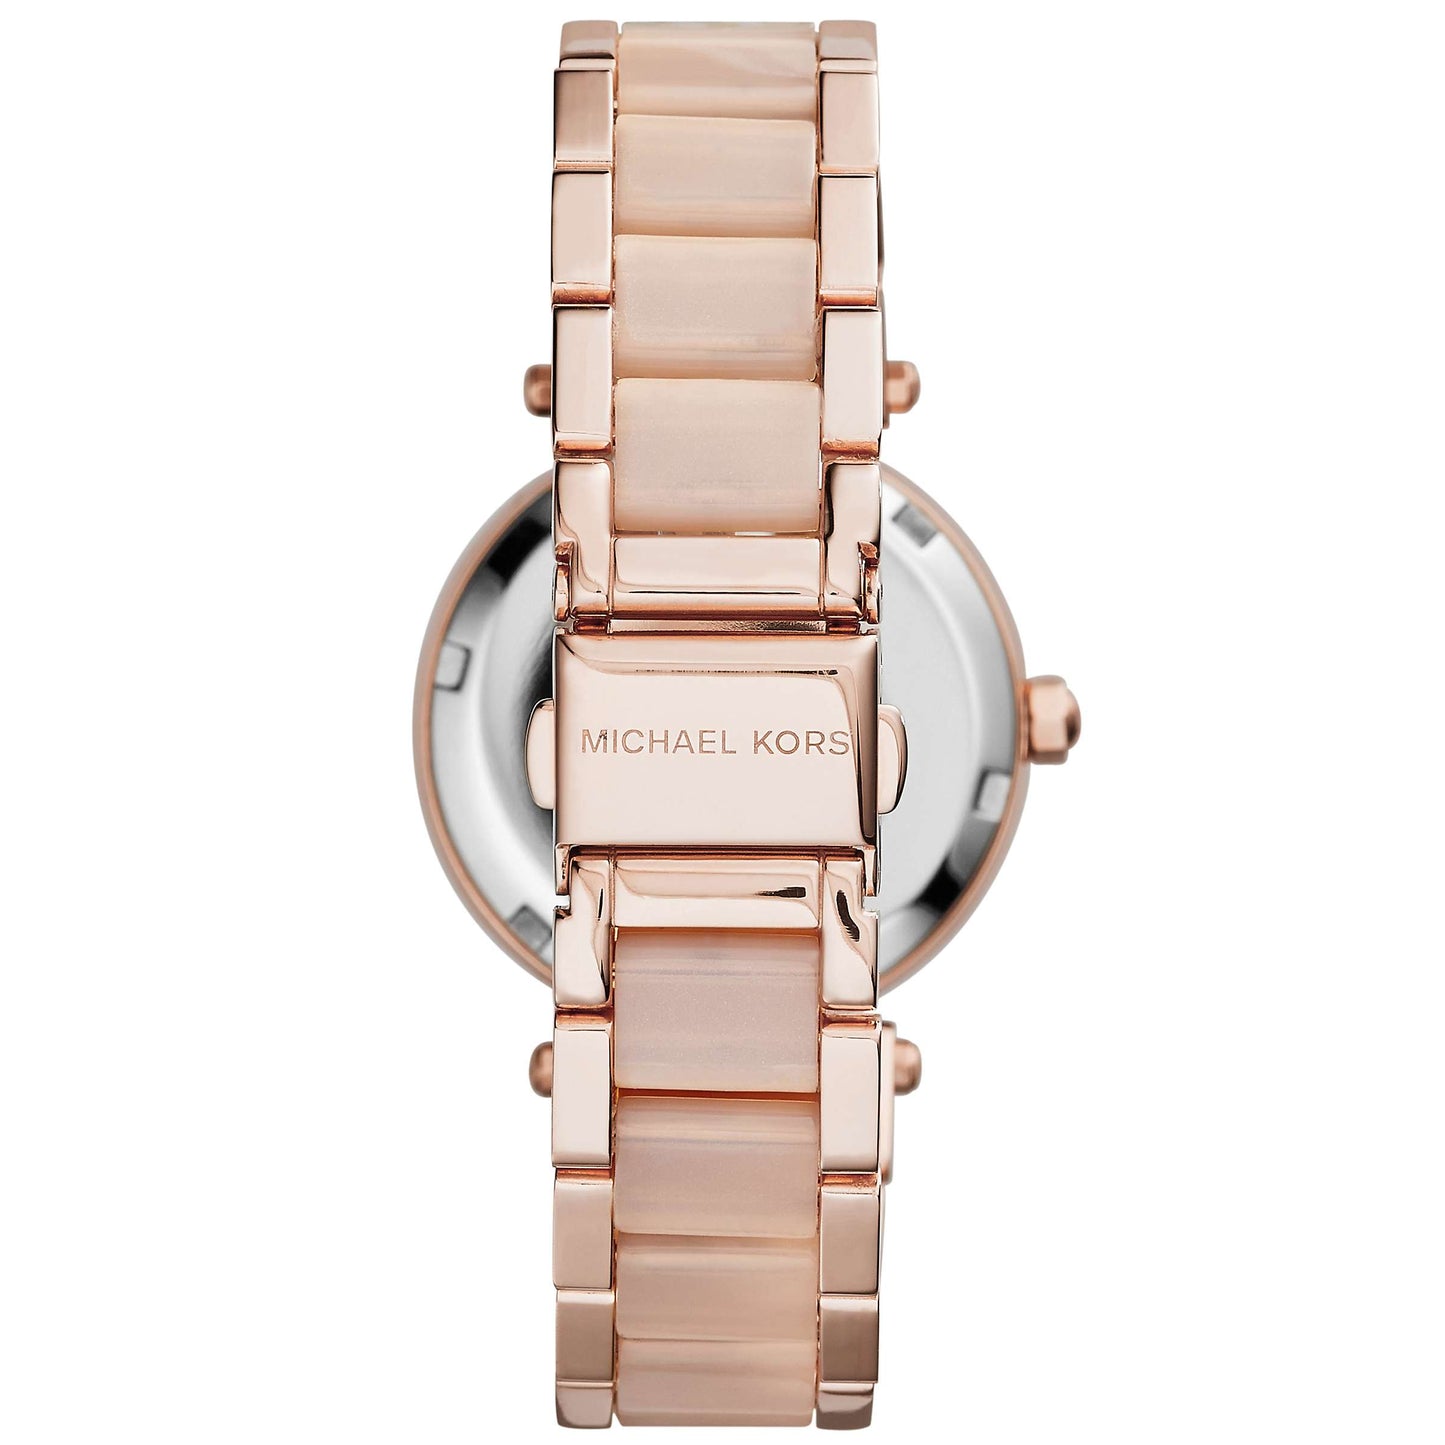 Michael Kors MK6110 Pink and Rose Gold Toned Watch Women's Watch - mzwatcheslk srilanka